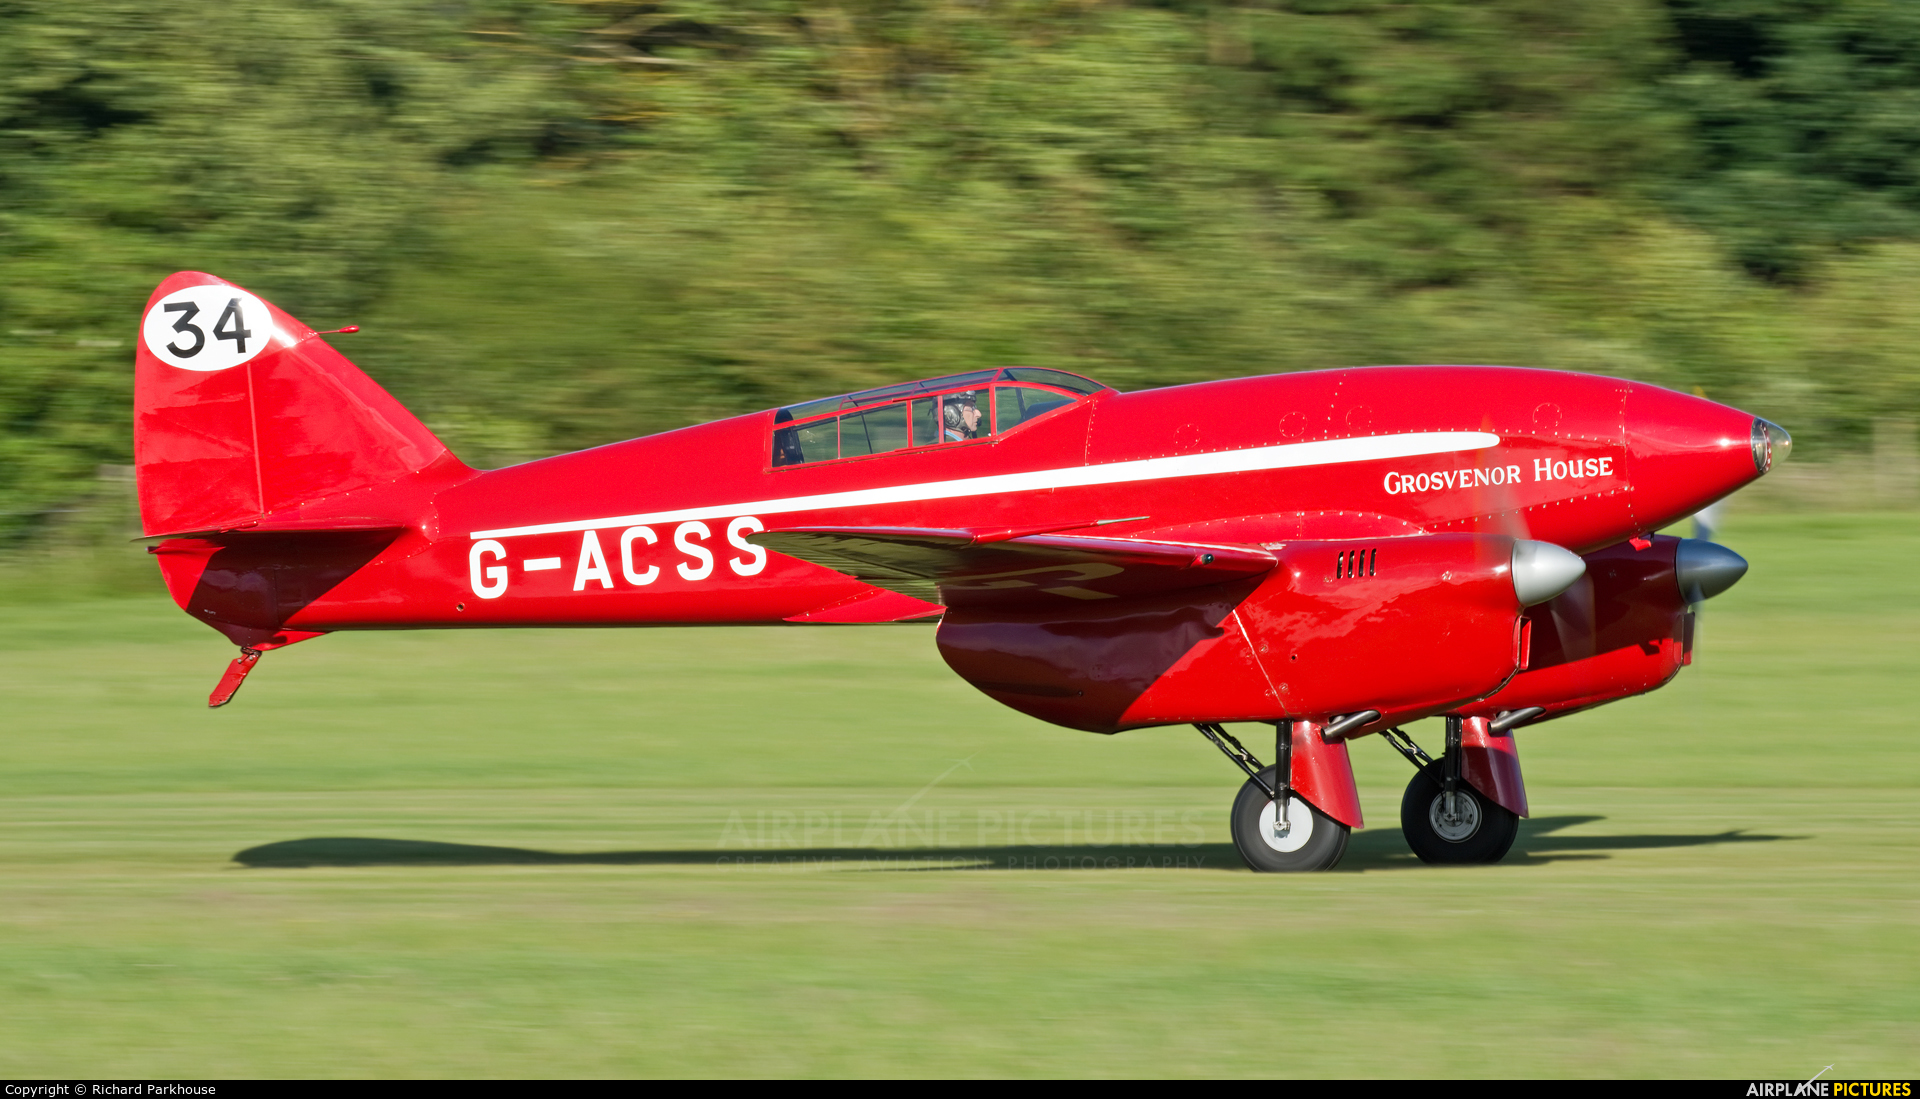 The Shuttleworth Collection G-ACSS aircraft at Old Warden